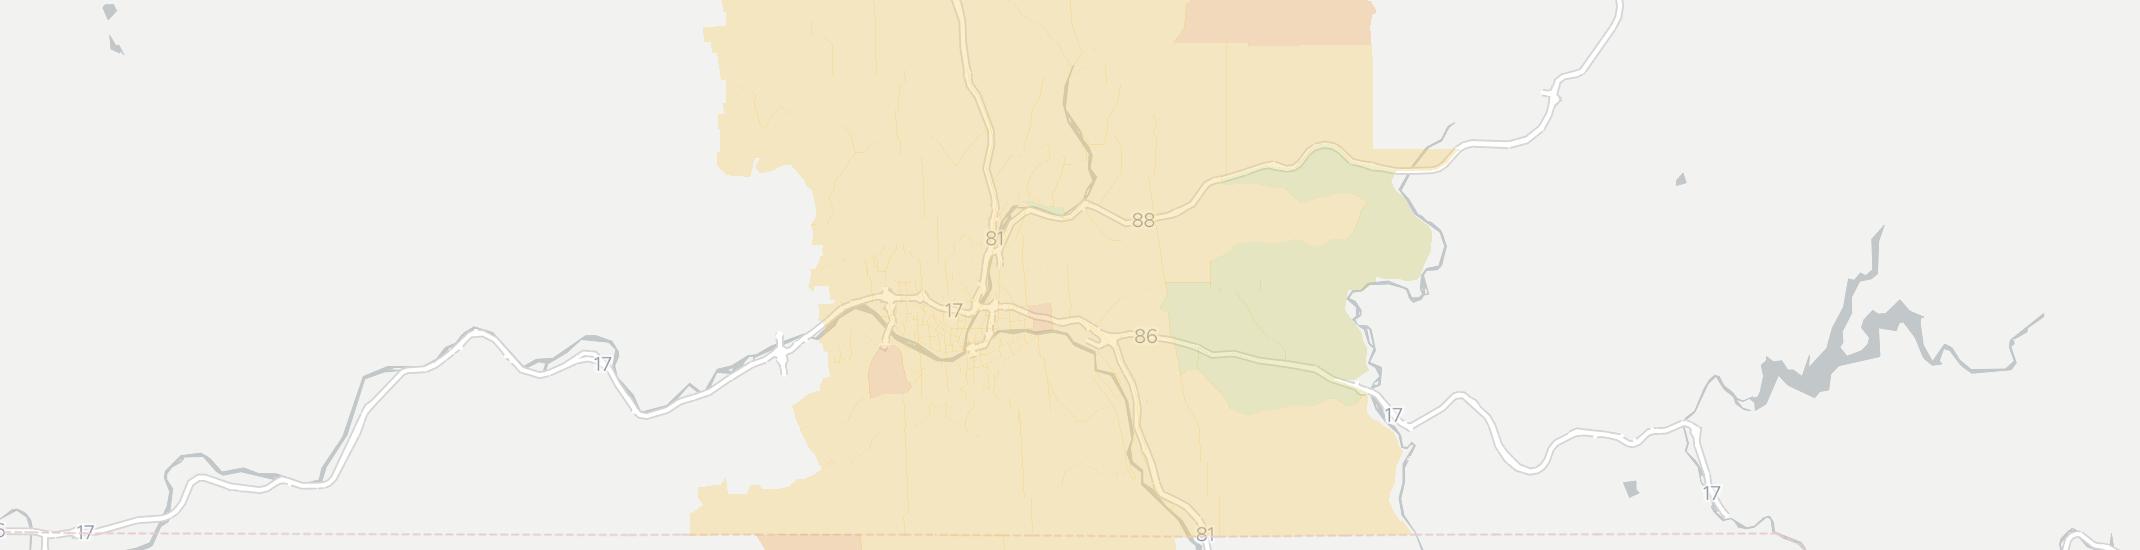 Binghamton Internet Competition Map. Click for interactive map.